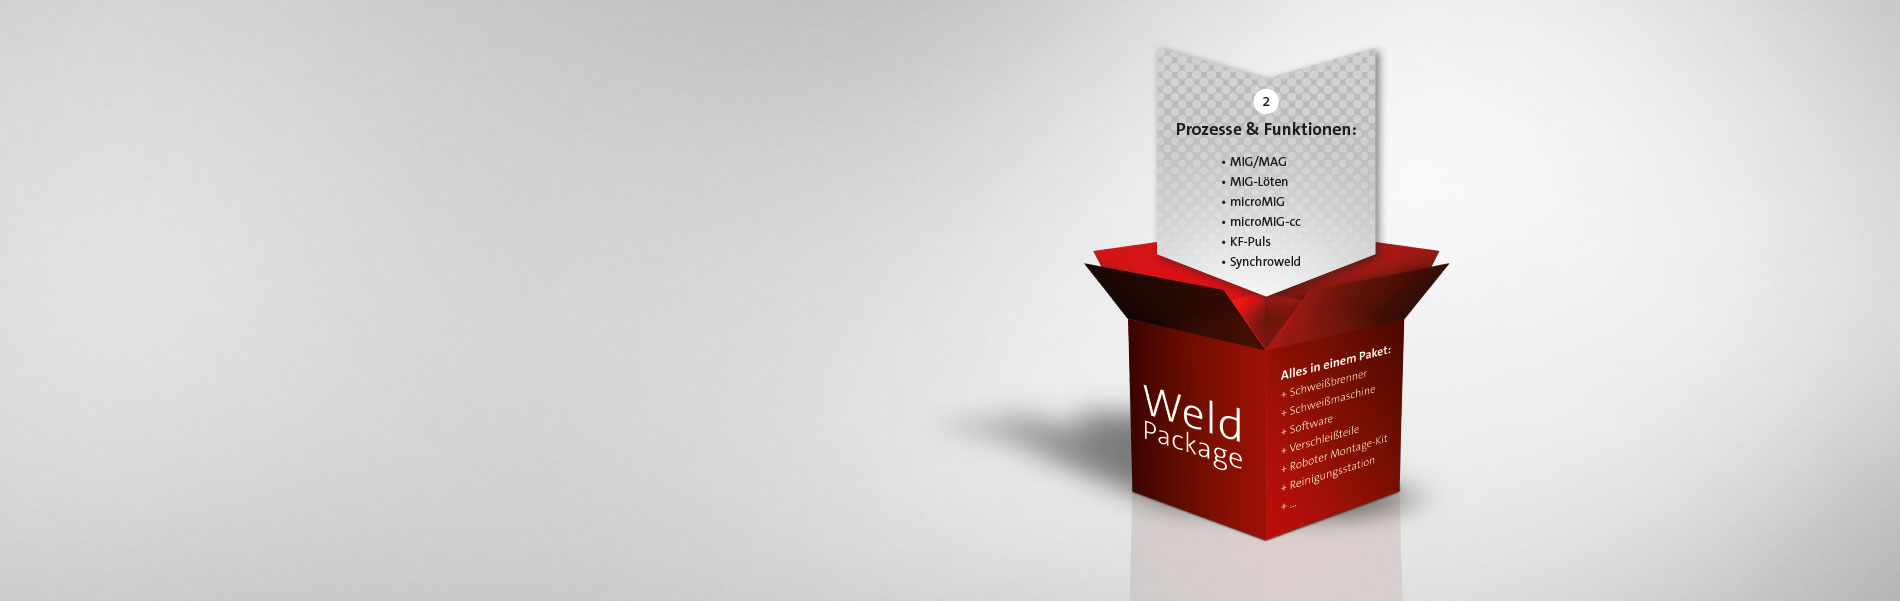 SKS Welding Systems Weld Packages Prozesse & Funktionen: MIG/MAG, MIG-Löten, microMIG, microMIG-cc, KF-Puls, Synchroweld